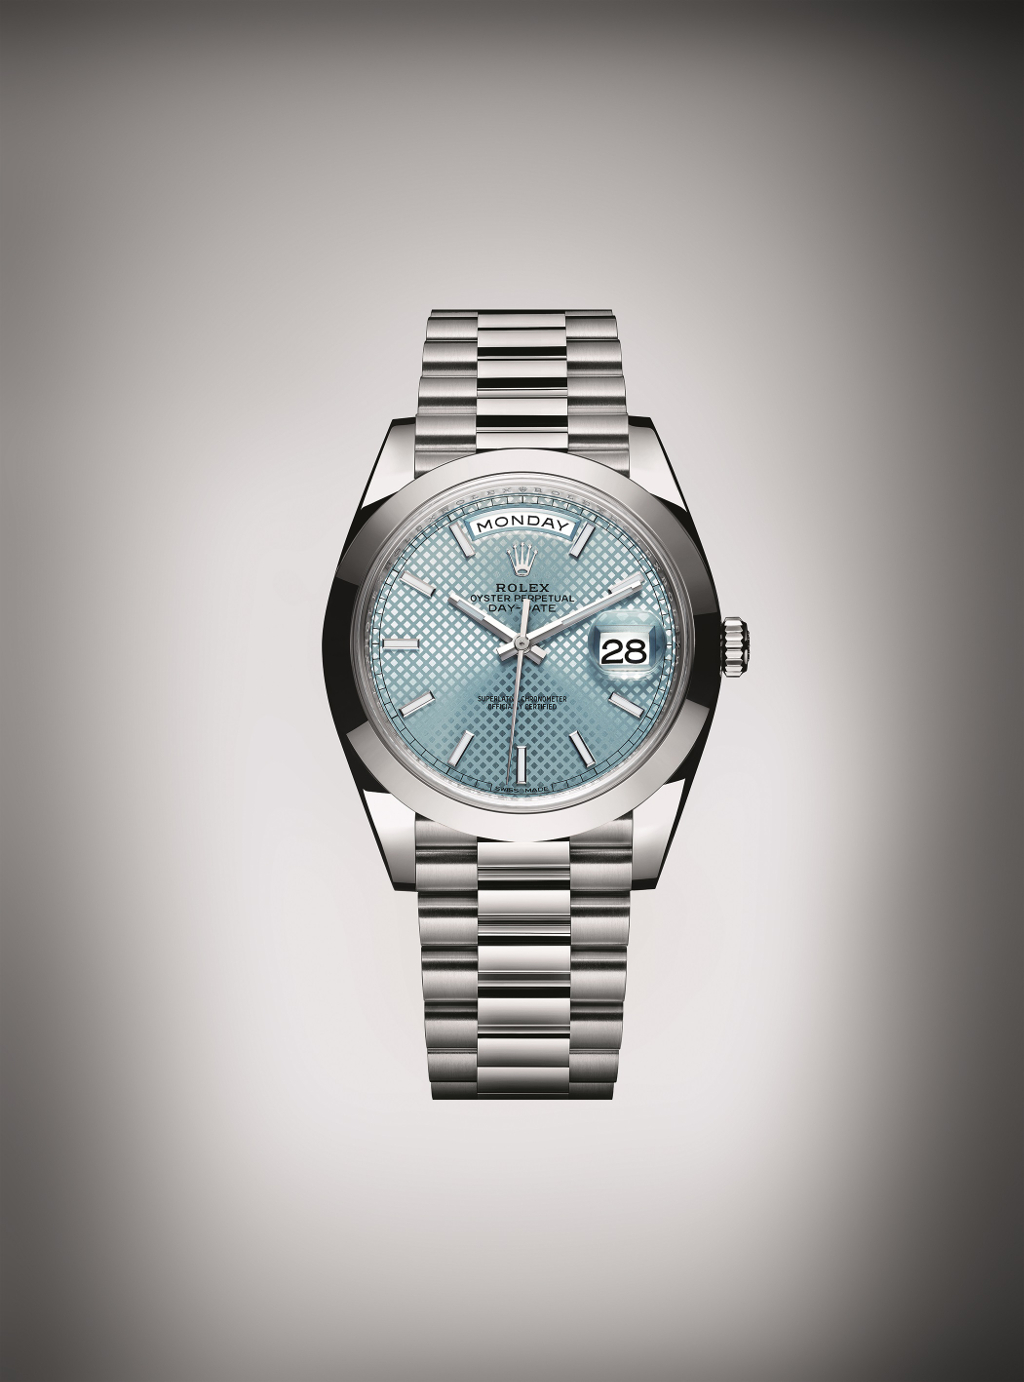 The Rolex Daydate 40. This example is in 950 platinum. 